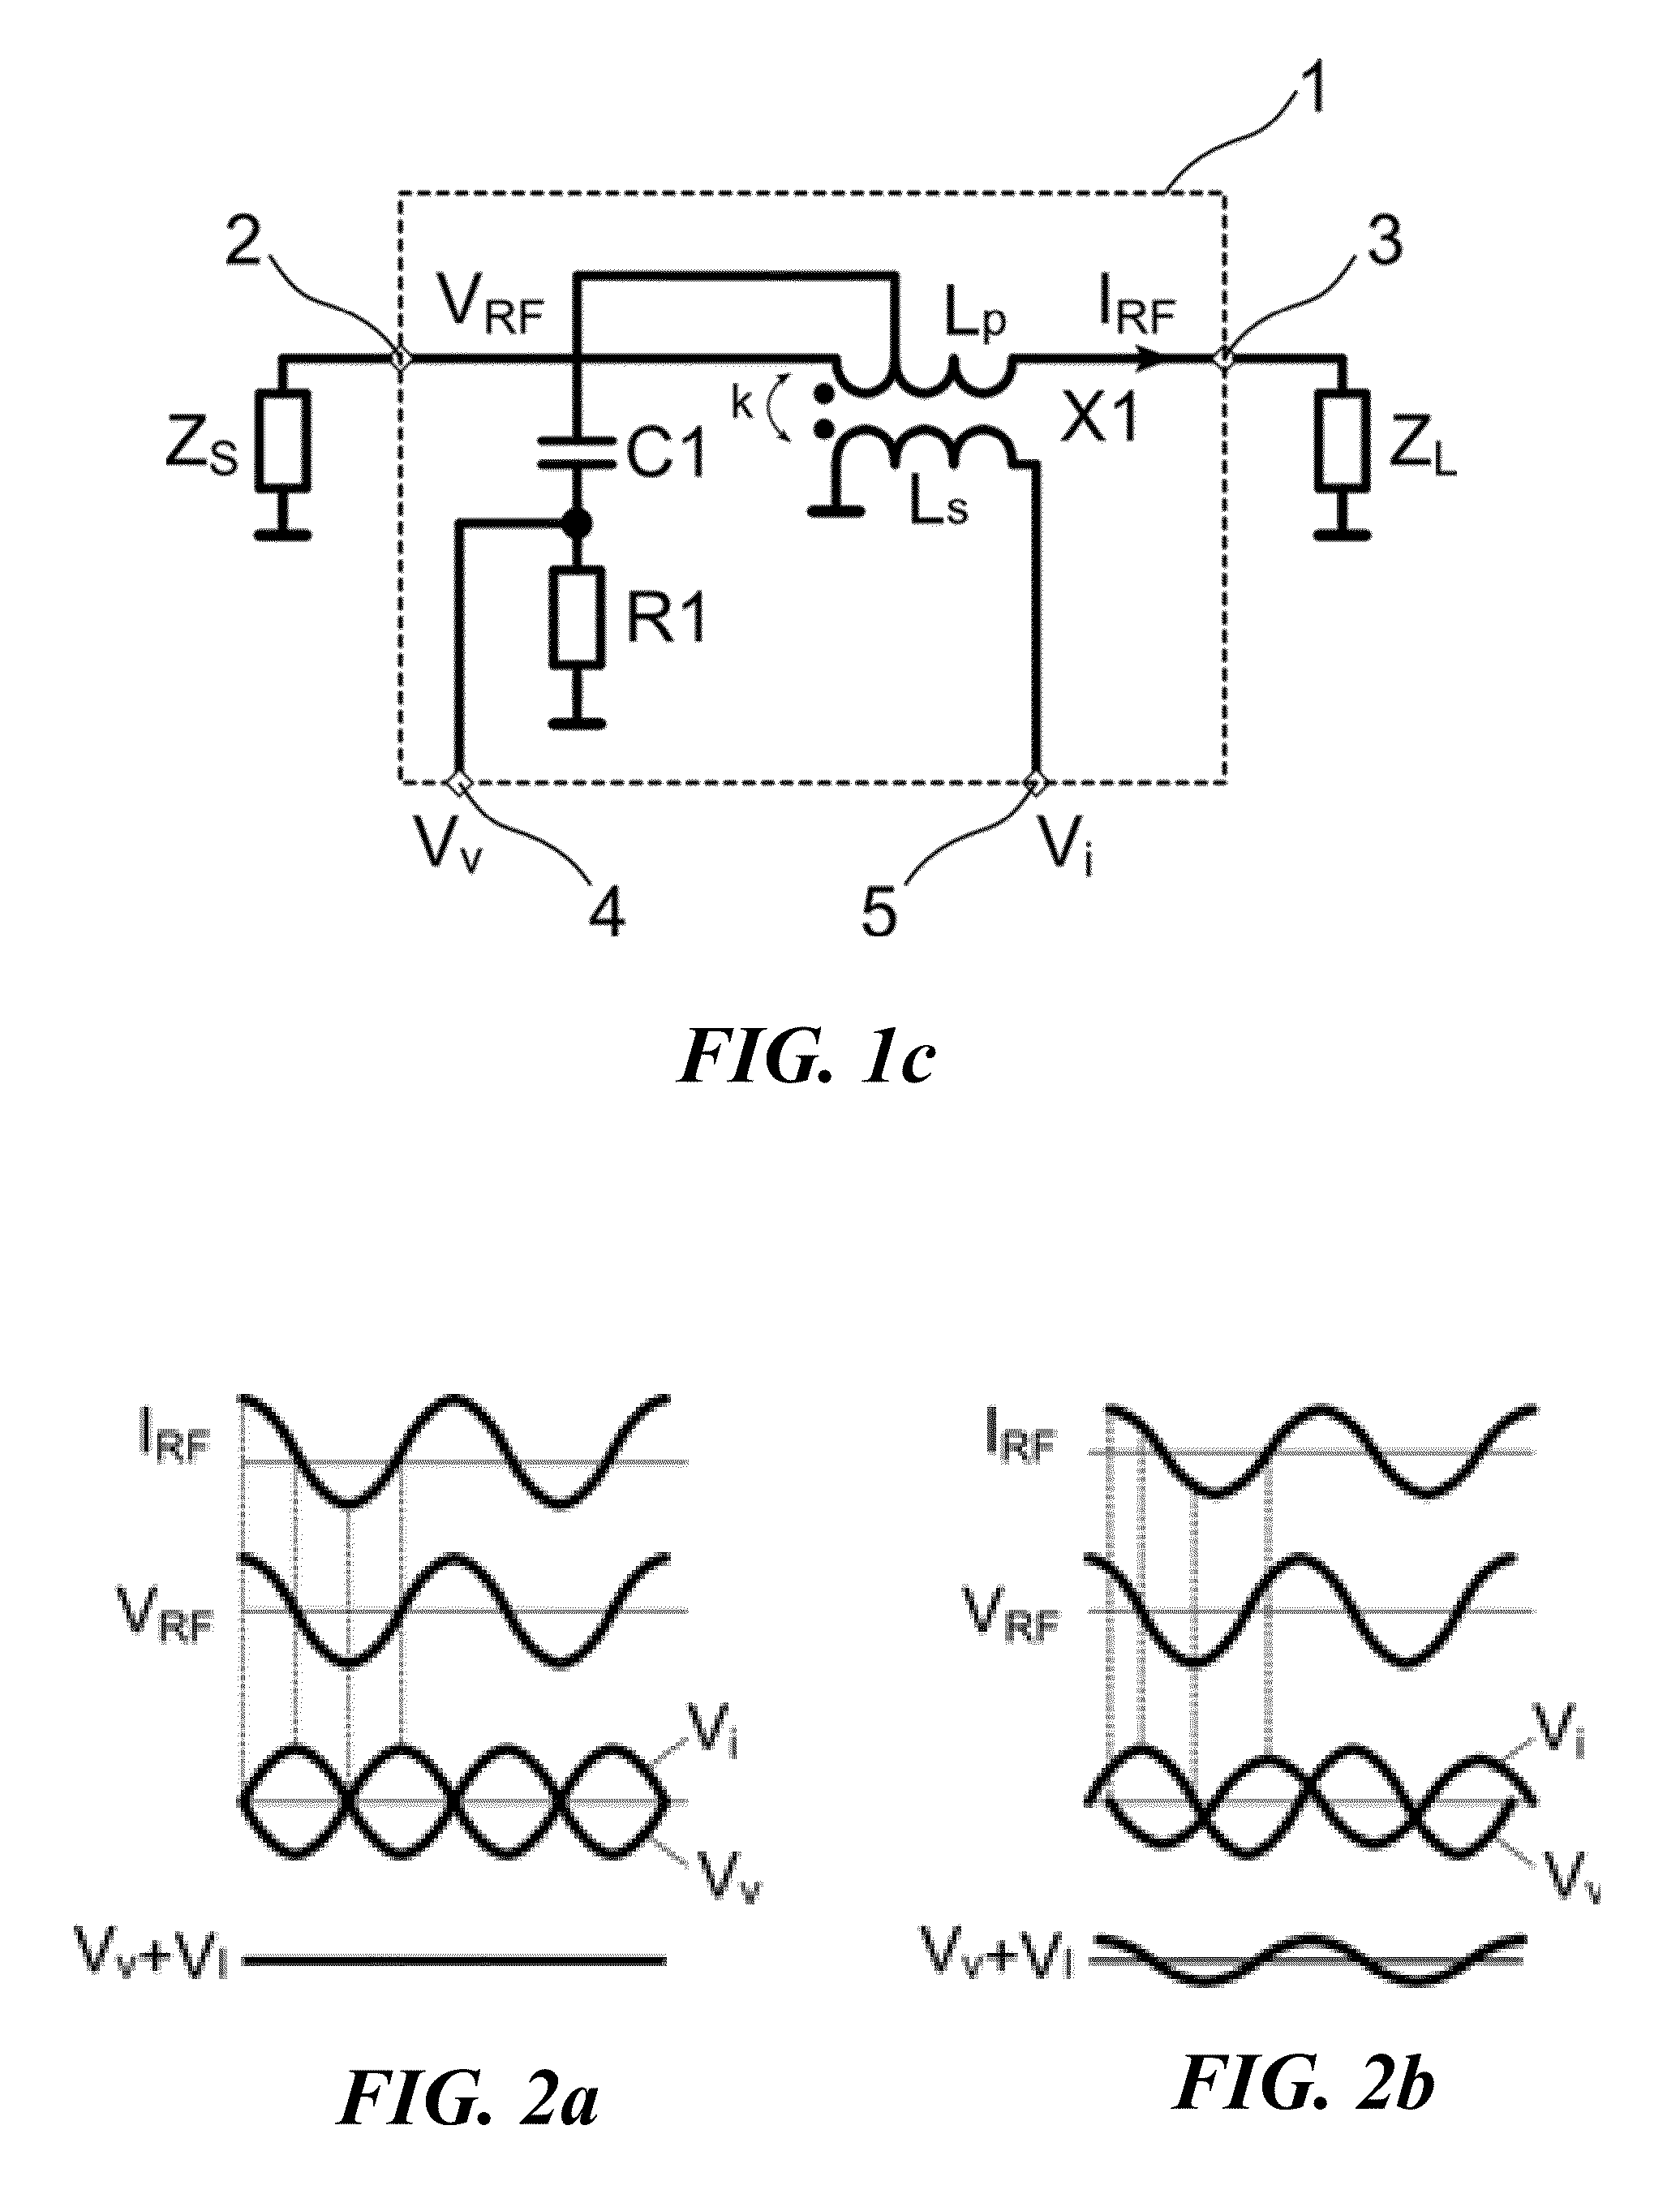 System and Method for a Transformer and a Phase-Shift Network